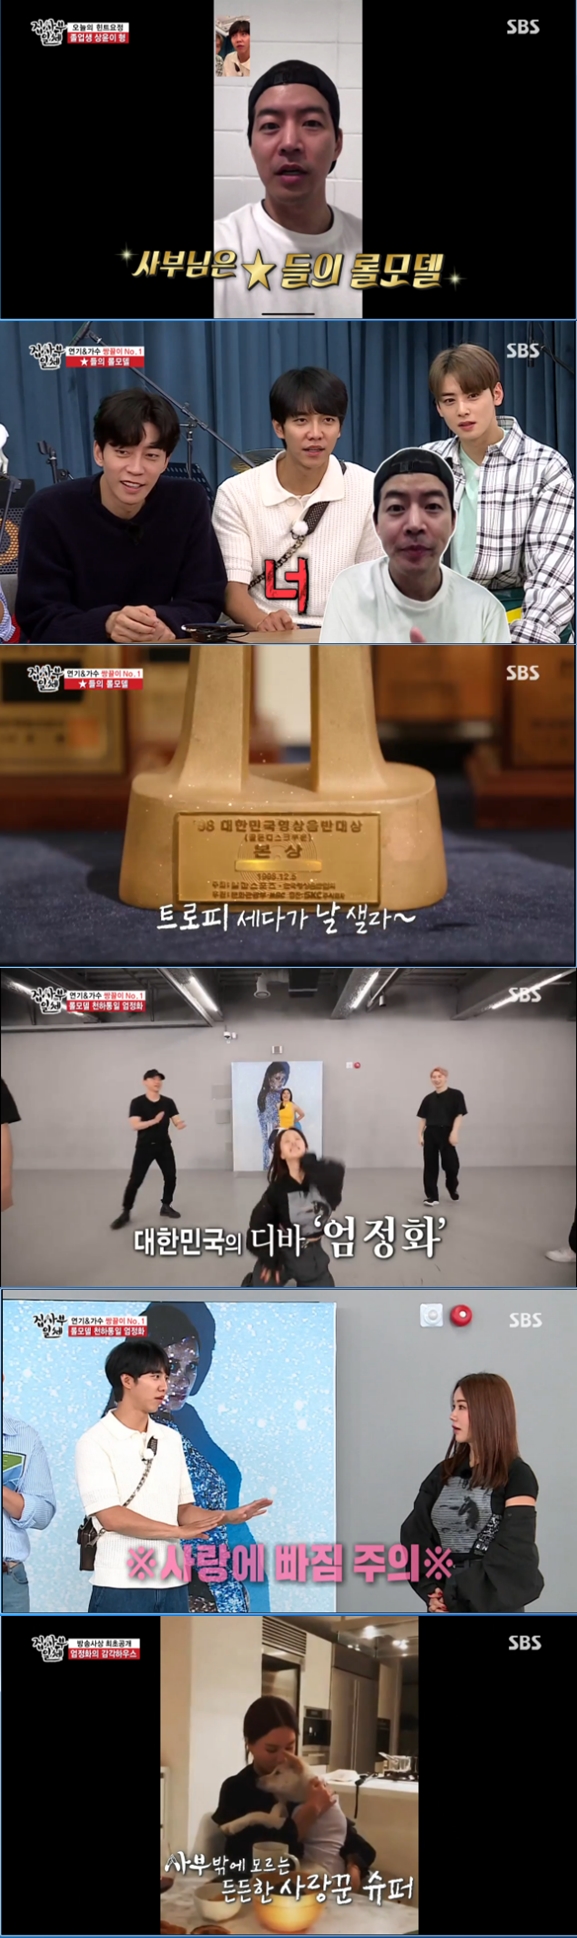 Life of Uhm Jung-hwa has been unveiled.In the SBS entertainment program All The Butlers broadcasted on the 14th, Deva Uhm Jung-hwa, the representative of Korea, who won the first prize in Acting and Singer Ssang, came out as master and spent a day with the members.The production team showed two pillars covered in cloth, saying it was a hint about the master this week. The members naturally confirmed the hint, saying, I thought it was originally here.In the first hint, there were Acting awards that Master received this week.Lee Seung-gi, who saw a white prize among many actresses, expressed his respect, saying, White prize can not be won by anyone.Jillsera Yang Se-hyeong also emphasized the rareness of white statues.The members asked, Did not you two get a white prize? Lee Seung-gi and Yang Se-hyeong answered I received it and did not hide the white phase flax.The members said, They are also rivals.Except for Lee Seung-gi and Yang Se-hyeong, the remaining three members did not hide their desire for the SBS entertainment Rookie award.Cha Eun-woo said, I have never received a Rookie award as a singer or an Acting.Shin Seung-rok and Kim Dong-Hyun also predicted a fierce competition for the Rookie Award, saying that they had never received the Rookie Award in any field.The crew told members who confirmed the trophy this week with hints about the master that the hint fairy was waiting.Lee Seung-gi received a phone from the crew, saying, Theres a hint fairy in a long time. The crew instructed them to make a video call.However, the hint fairy in the cell phone screen was wearing a mask and was not sure who the members were.However, only by looking at the eyes, Yang Se-hyeong and Shin Seung-rok found that the hint fairy was Lee Sang-yoon.Lee Sang-yoon, who greeted the members with a welcome greeting, said, The production team chose the wrong hint fairy.Lee Sang-yoon said, The hint fairy is on the crew side, but I am on the members side.Lee Sang-yoon gave big hints for the members as he had predicted: at first, he was disappointed to inform them that he was an actress as Master this week, as all the members knew.But soon he was cheered by the members this week when he informed him that the master was Koreas only Deva.The members, who learned who the master was, met with Master Uhm Jung-hwa at the dance studio; Uhm Jung-hwa performed a joint performance of Ending Credit with Riakim.From the expression, it boasts a live expression and a patented dance line, and emits a force of charismatic charismatic aid.The members praised Uhm Jung-hwa, who is a unique entertainer who has reached the top of both fields, actors and singers.Uhm Jung-hwa said, At the beginning of the challenge to Acting, I was shocked to see my Acting while monitoring.So I tried hard to play various roles after that. I live alone, said Uhm Jung-hwa, the first person in Life, I will release the Wannabe Slightly Single Life Rule for singles living alone.Rule 1 was one thing to enjoy without any year-round. Uhm Jung-hwa danced excitedly to the hit song Poison saying, My enjoyment is music and dance.The members competed for the second V-man position to succeed Kim Jong-min, who was very popular with Uhm Jung-hwa in a couple dance.Uhm Jung-hwa then opened a yoga class and showed off his high-quality yoga skills that he had polished for 20 years.After finishing yoga classes, Uhm Jung-hwa released the first single house on the air.From the simple living room with black and white to the terrace where fresh flowers and blue plants are located, to the piano room of healing, sensory interiors caught the attention.The members could not shut up when they saw the interiors and props that showed the sensibility and sense of Uhm Jung-hwa.